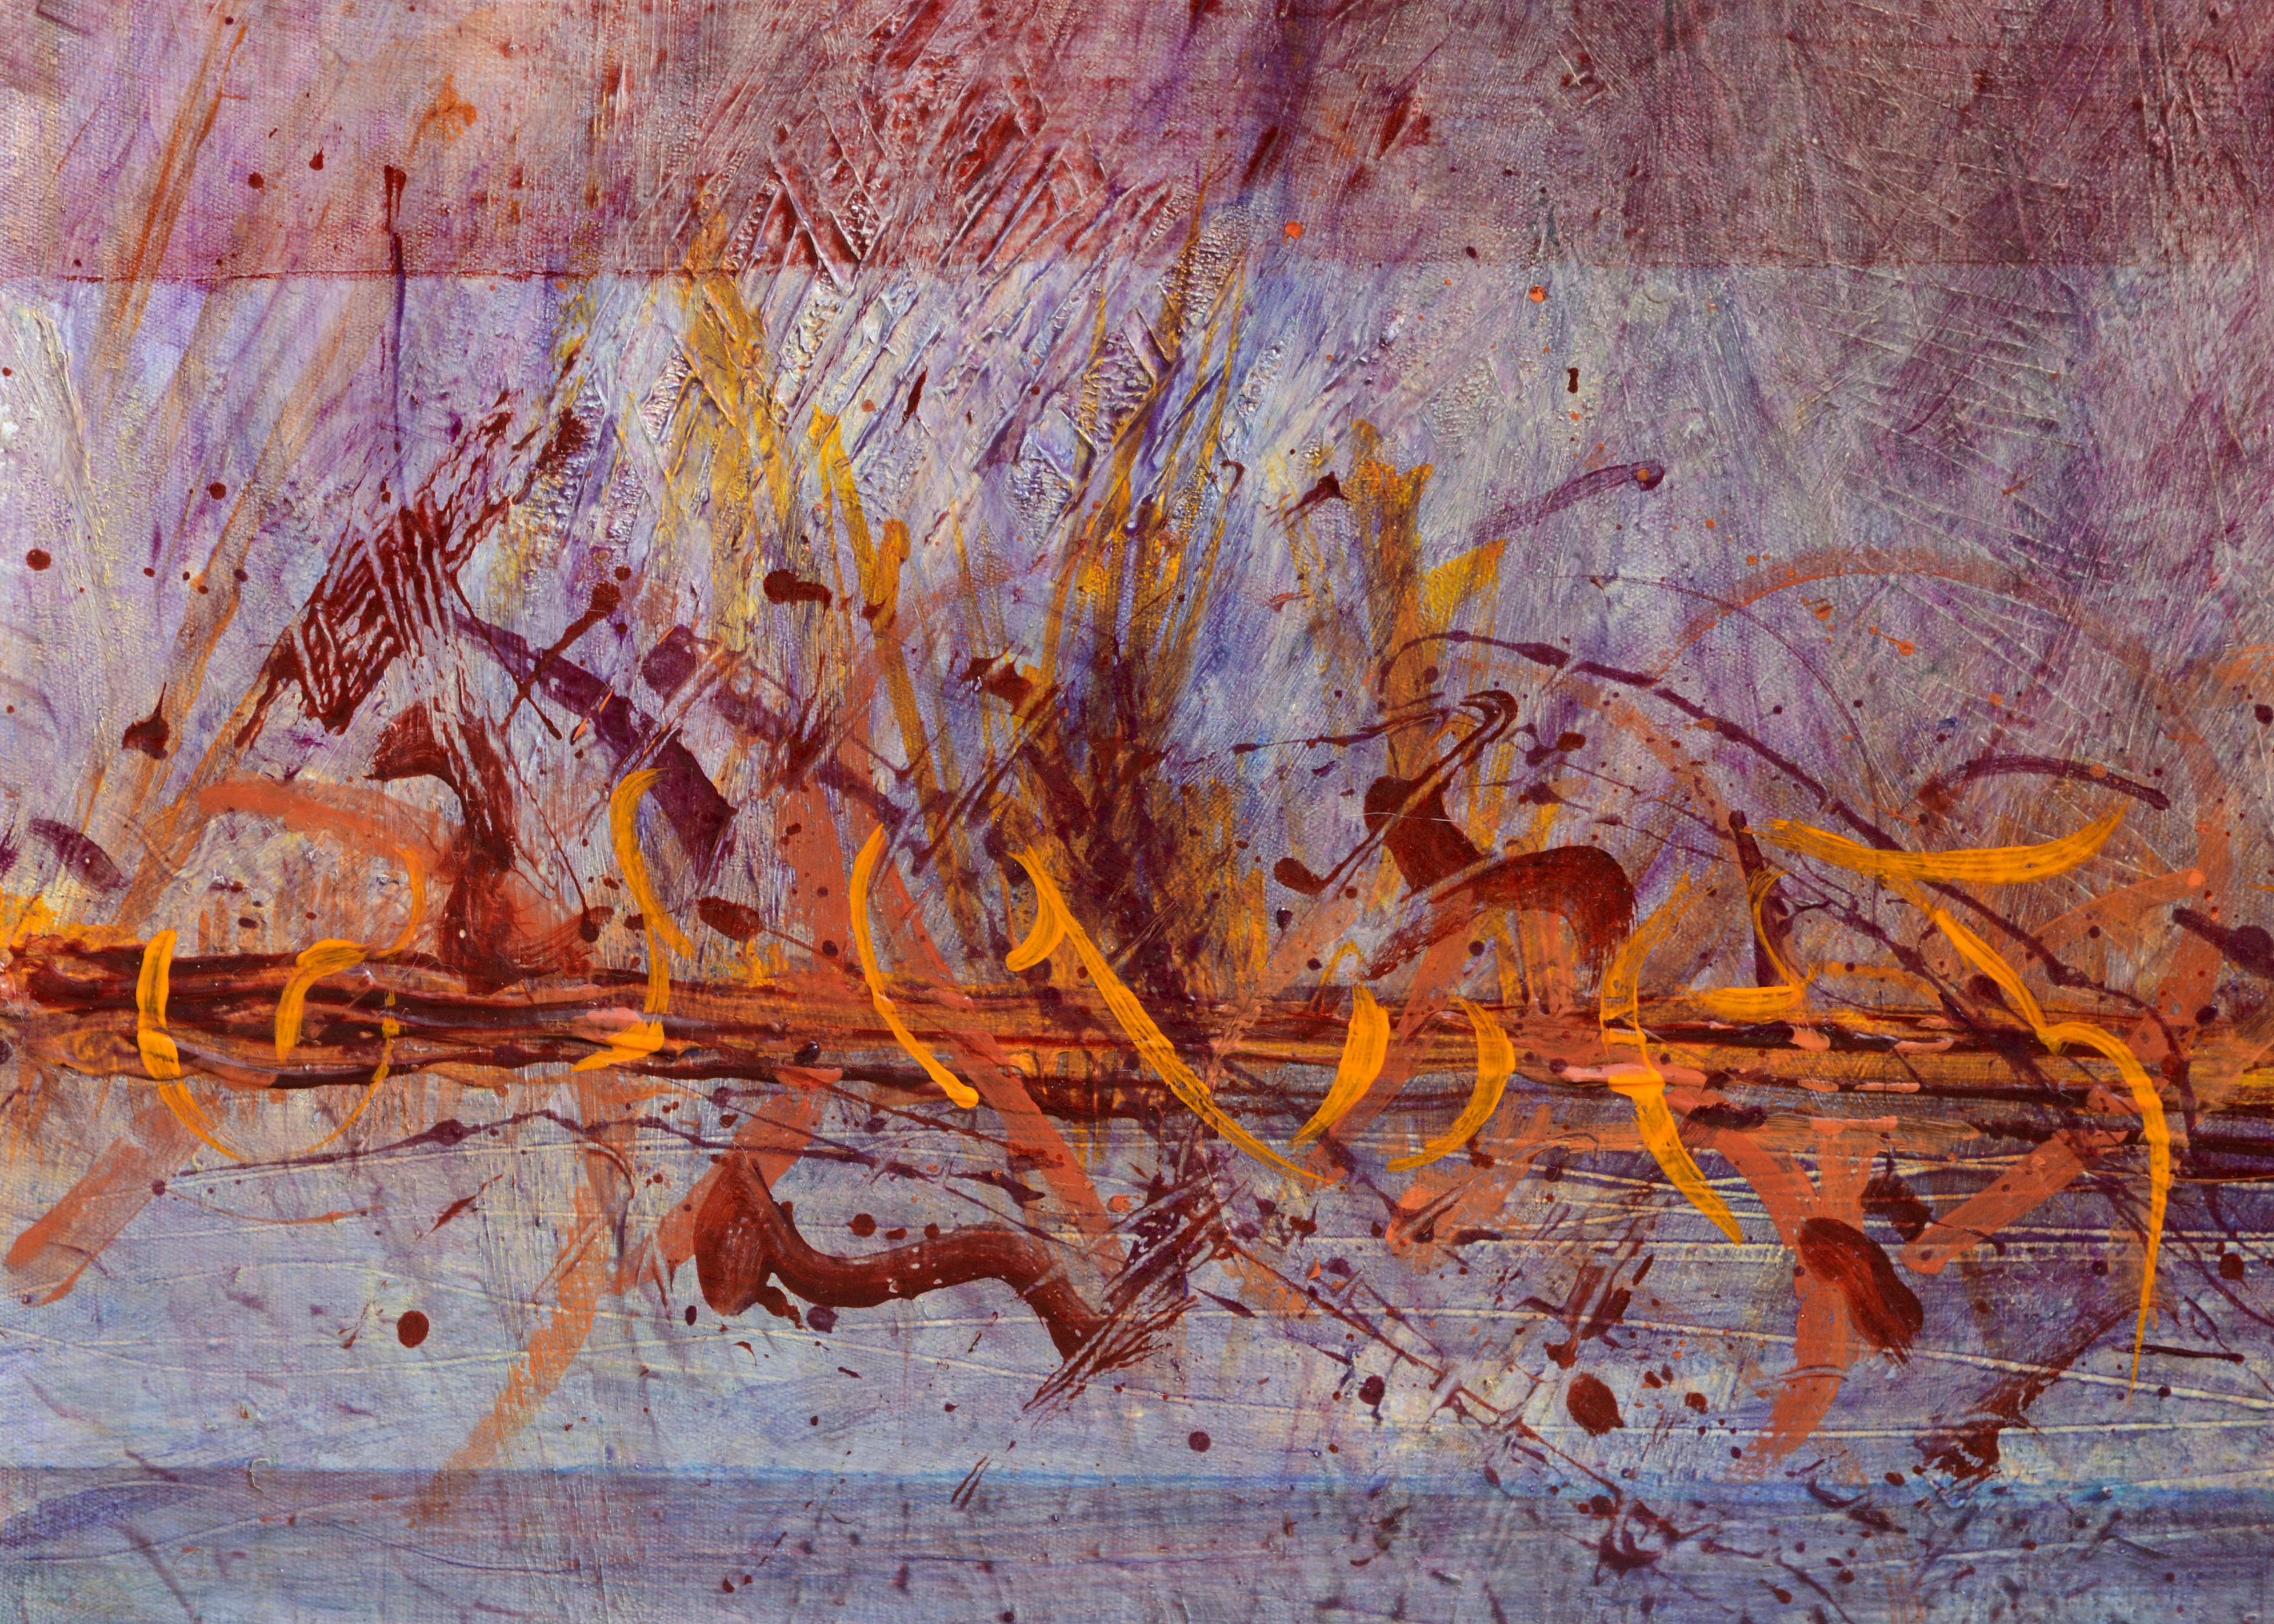 Abstract Fire Birds on the Water - Abstract Expressionist Painting by M. Anderson